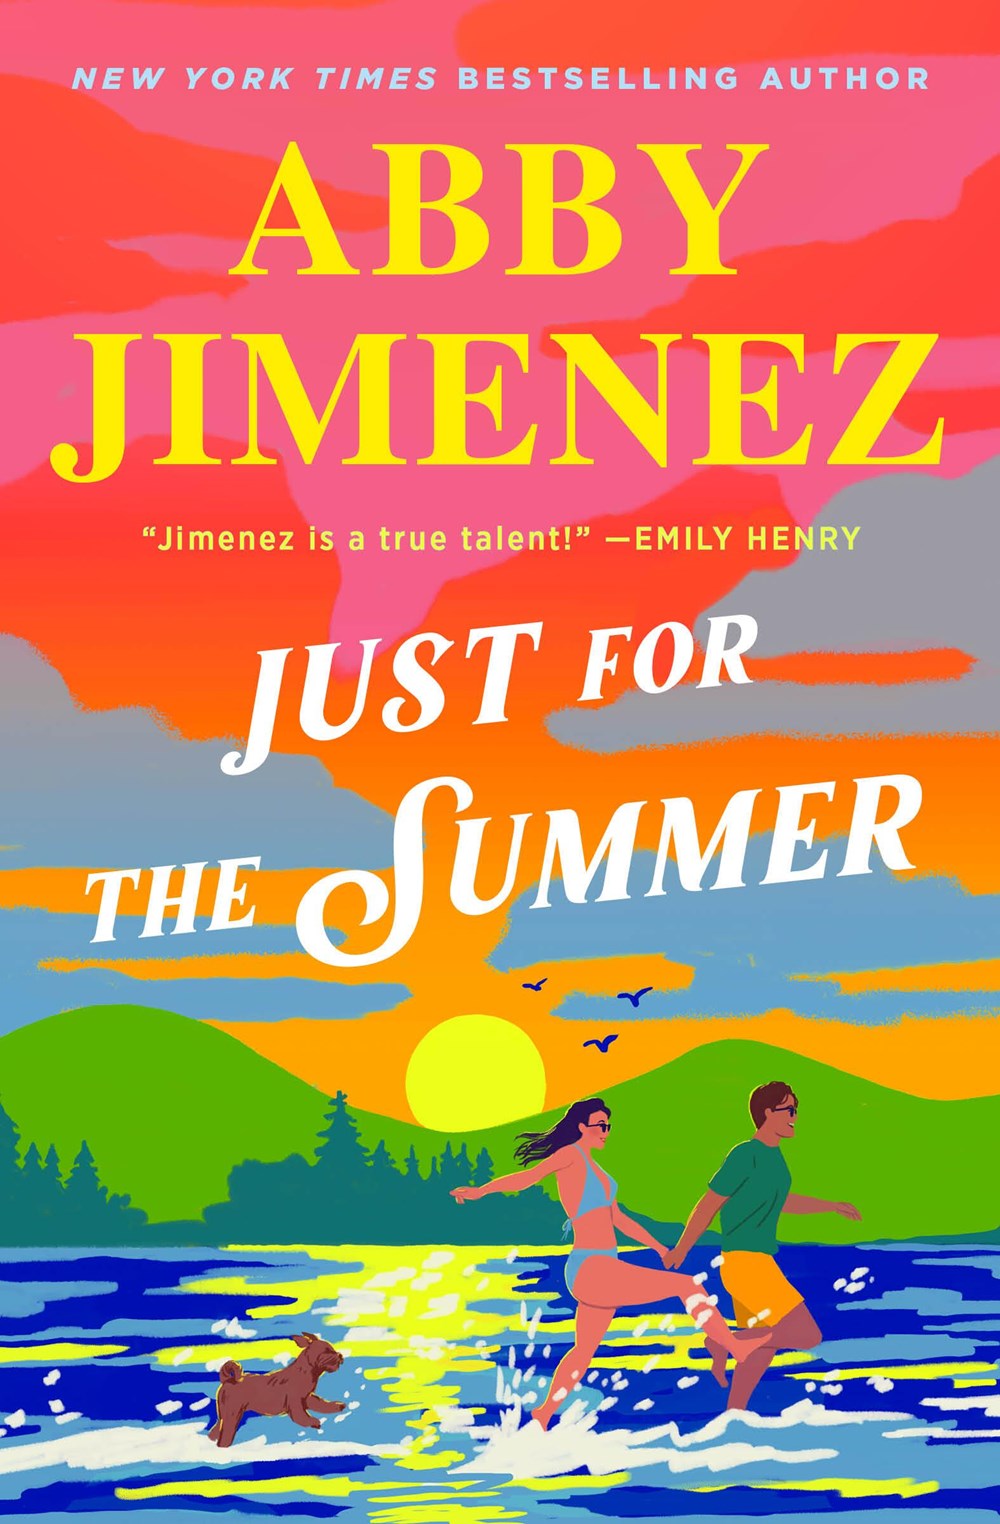 Read-Alikes for ‘Just for the Summer' by Abby Jimenez | LibraryReads